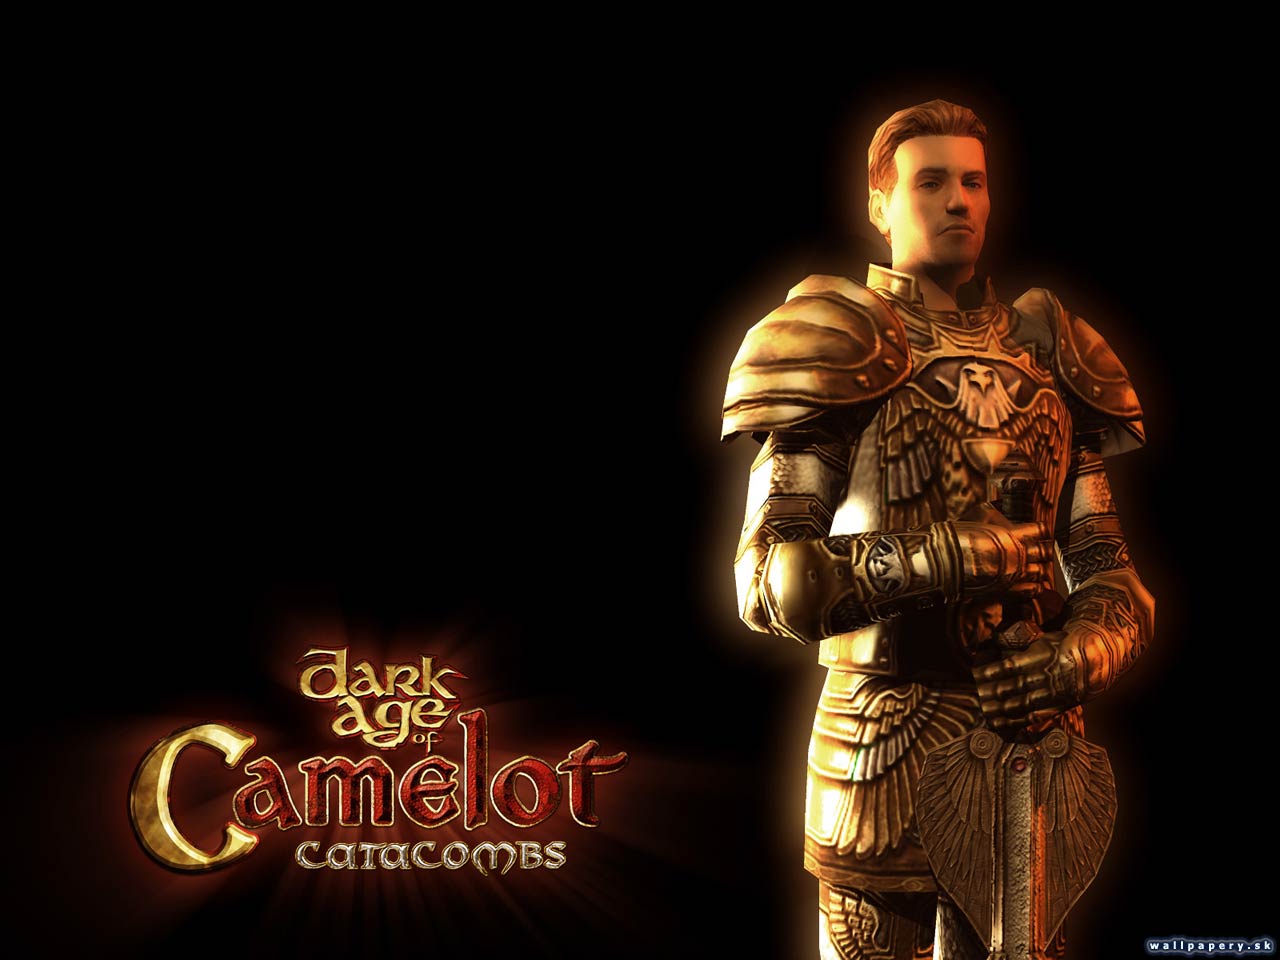 Dark Age of Camelot: Catacombs - wallpaper 1